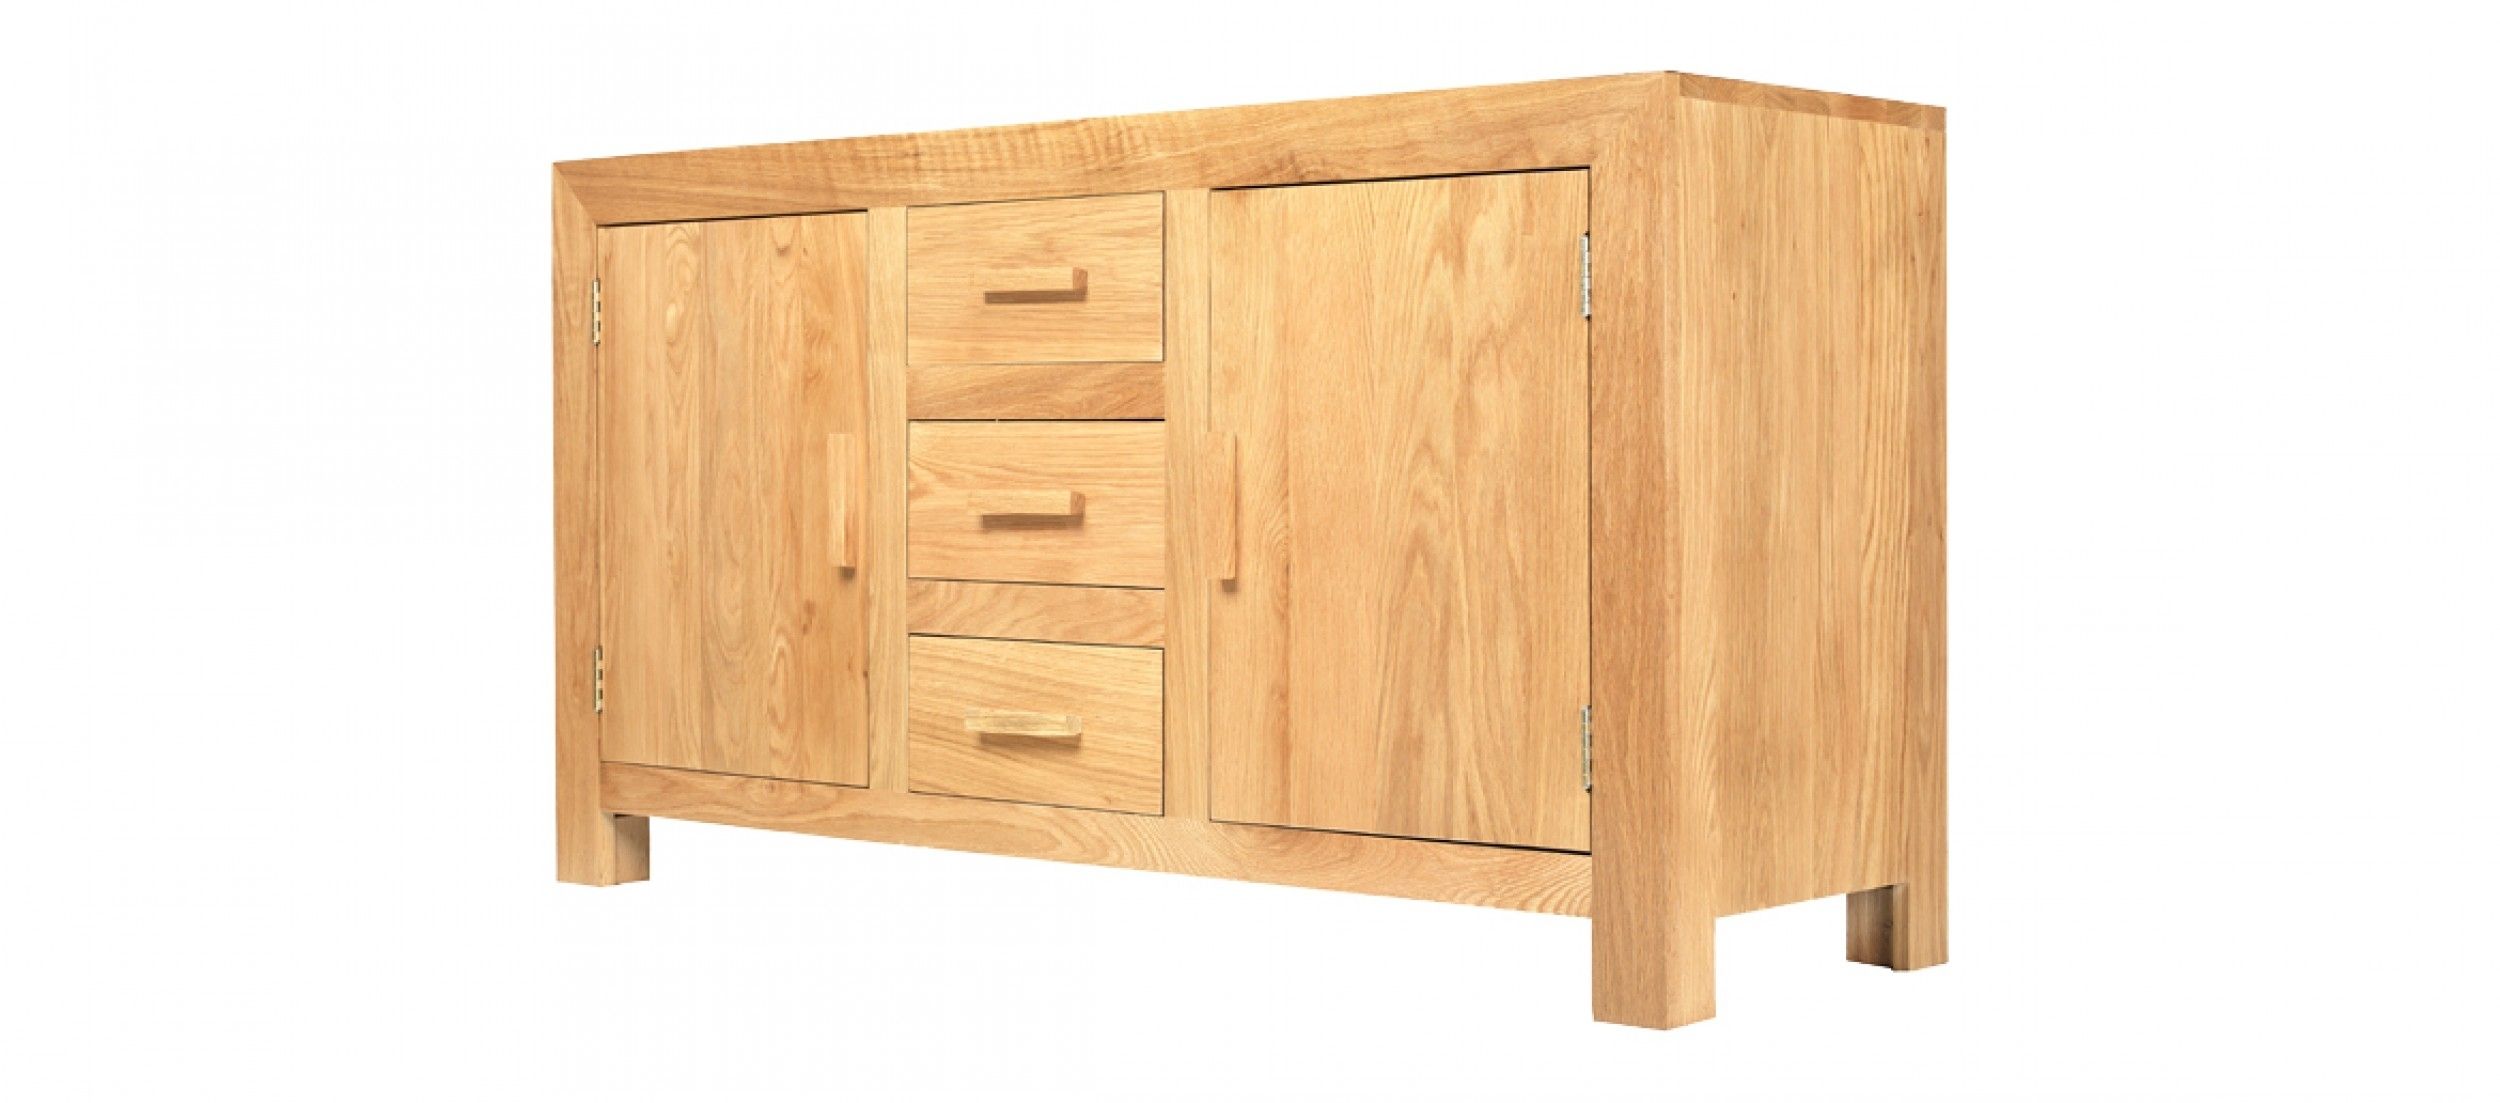 Cube Oak Large Sideboard | Quercus Living Within Best And Newest 4 Door/4 Drawer Cast Jali Sideboards (View 14 of 20)